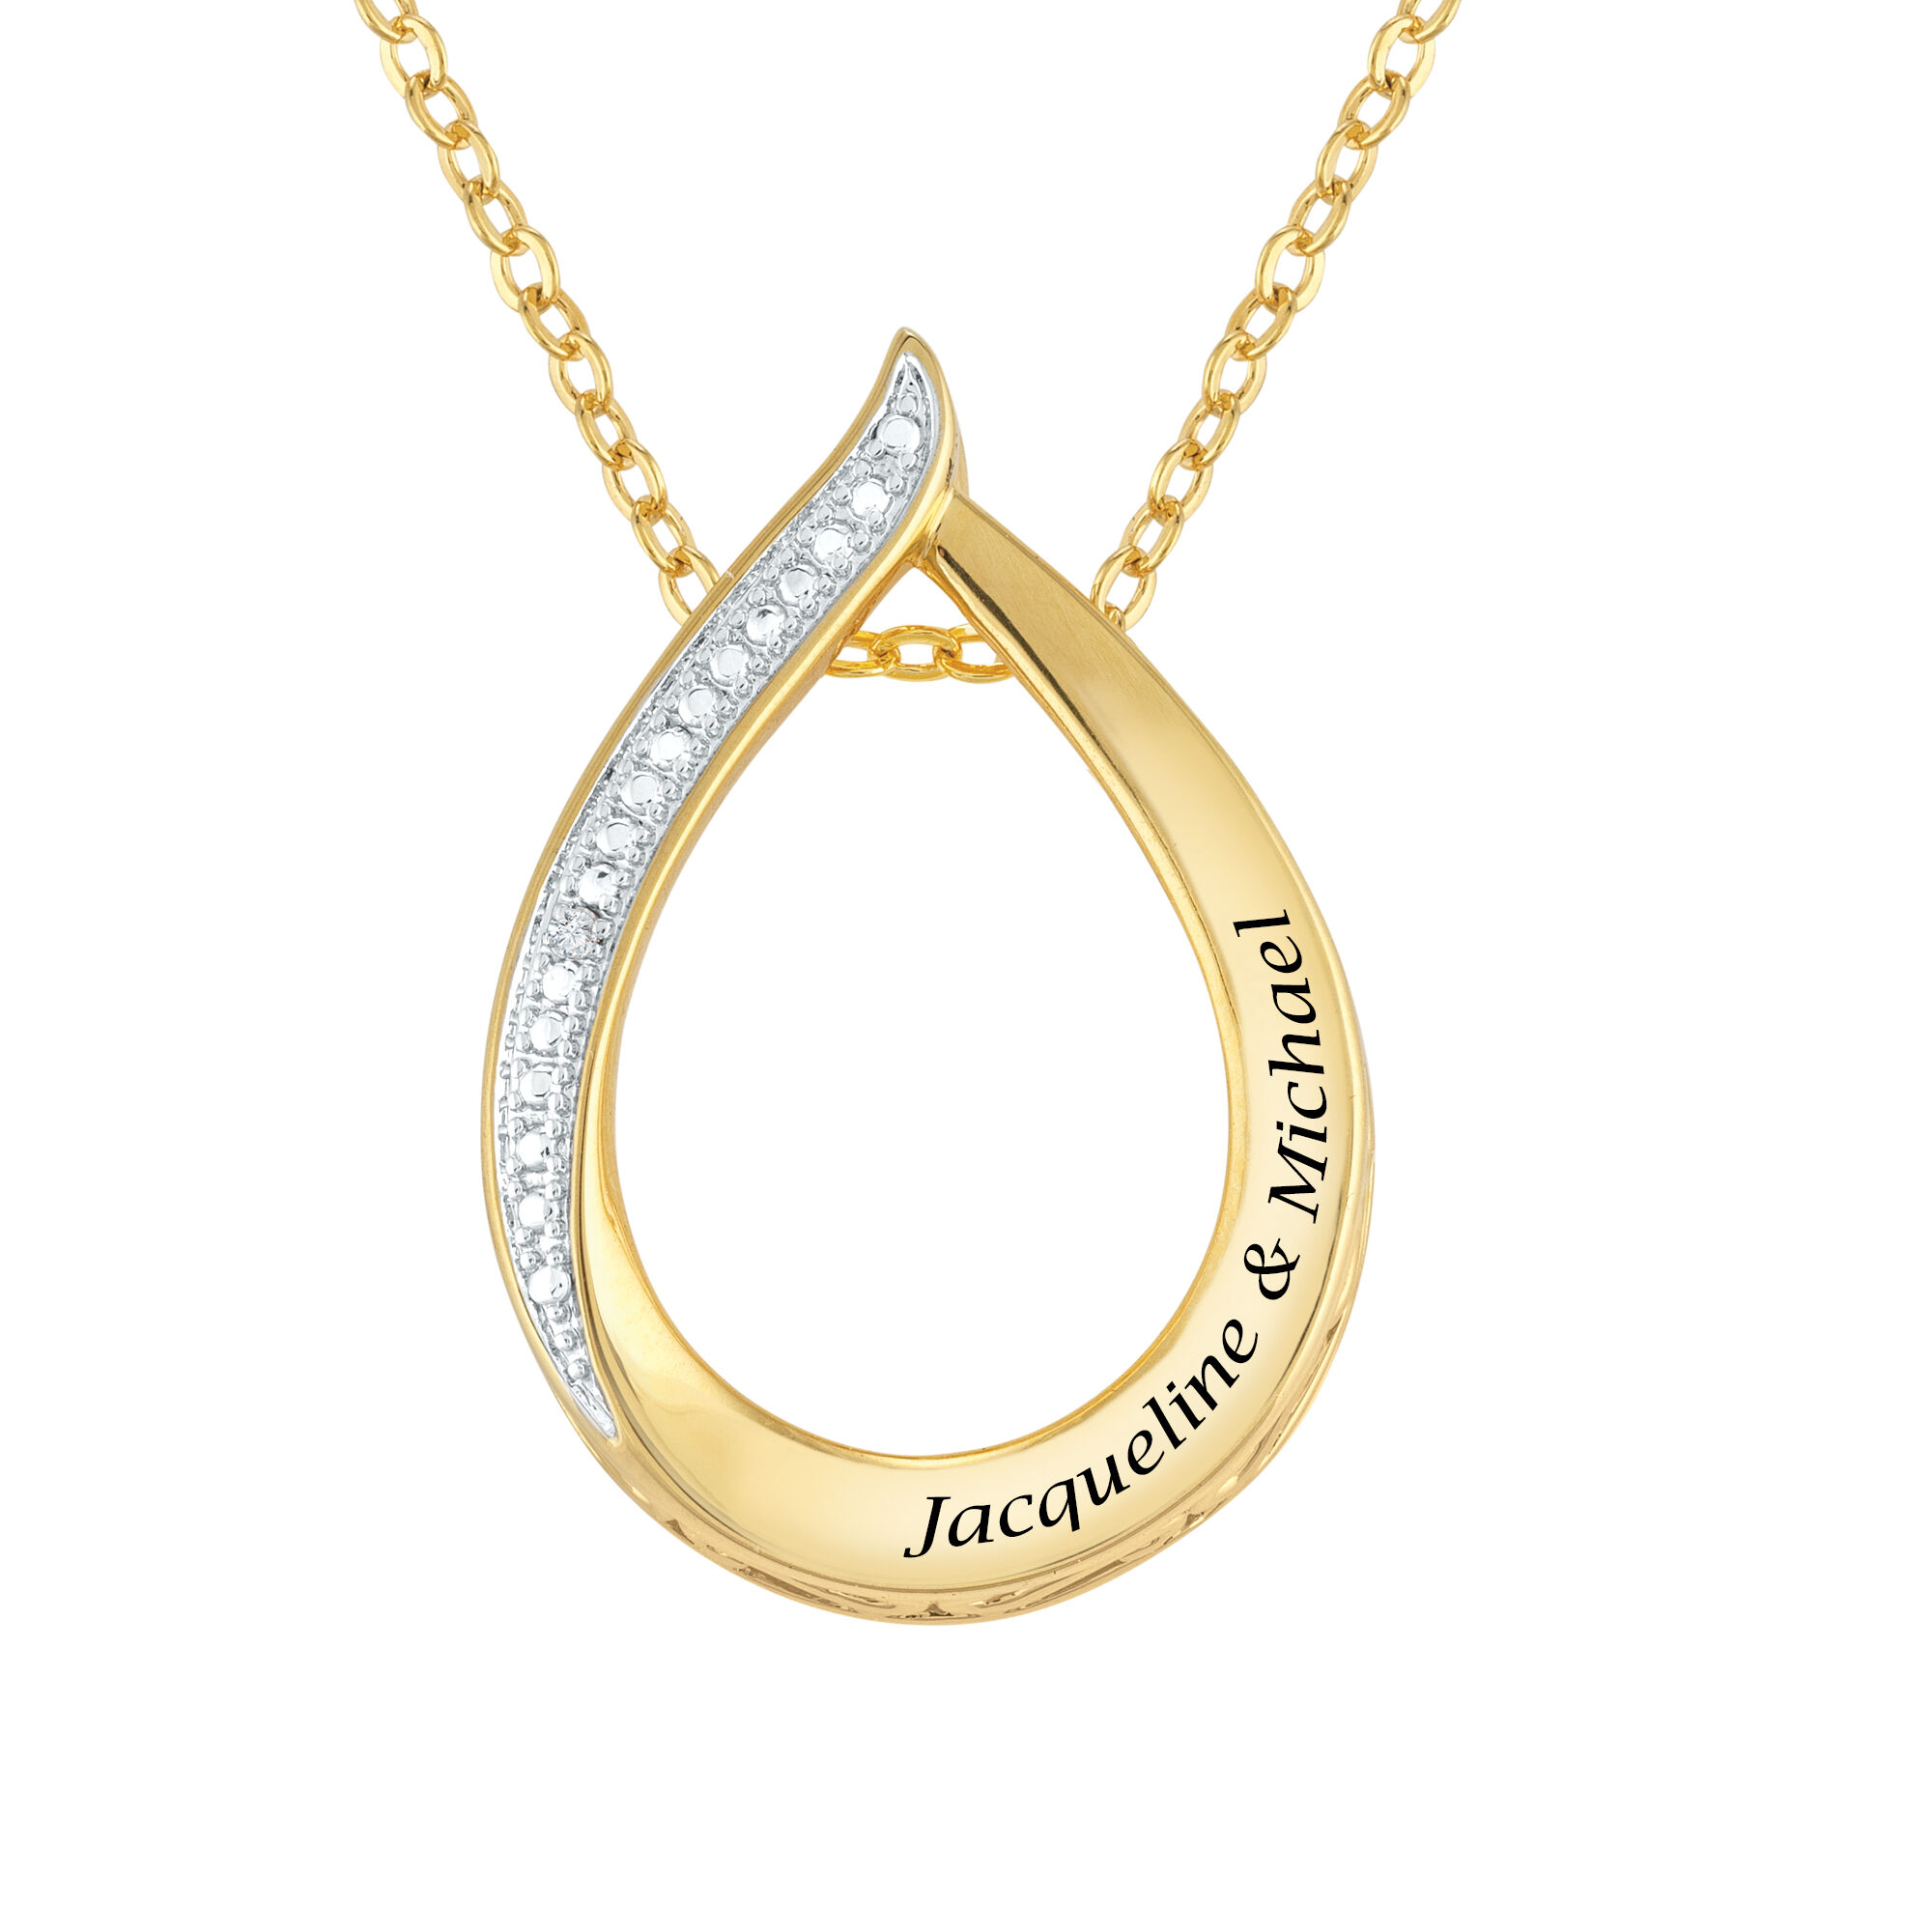 Forever Together Diamond Birthstone Pendant 11490 0012 b outer